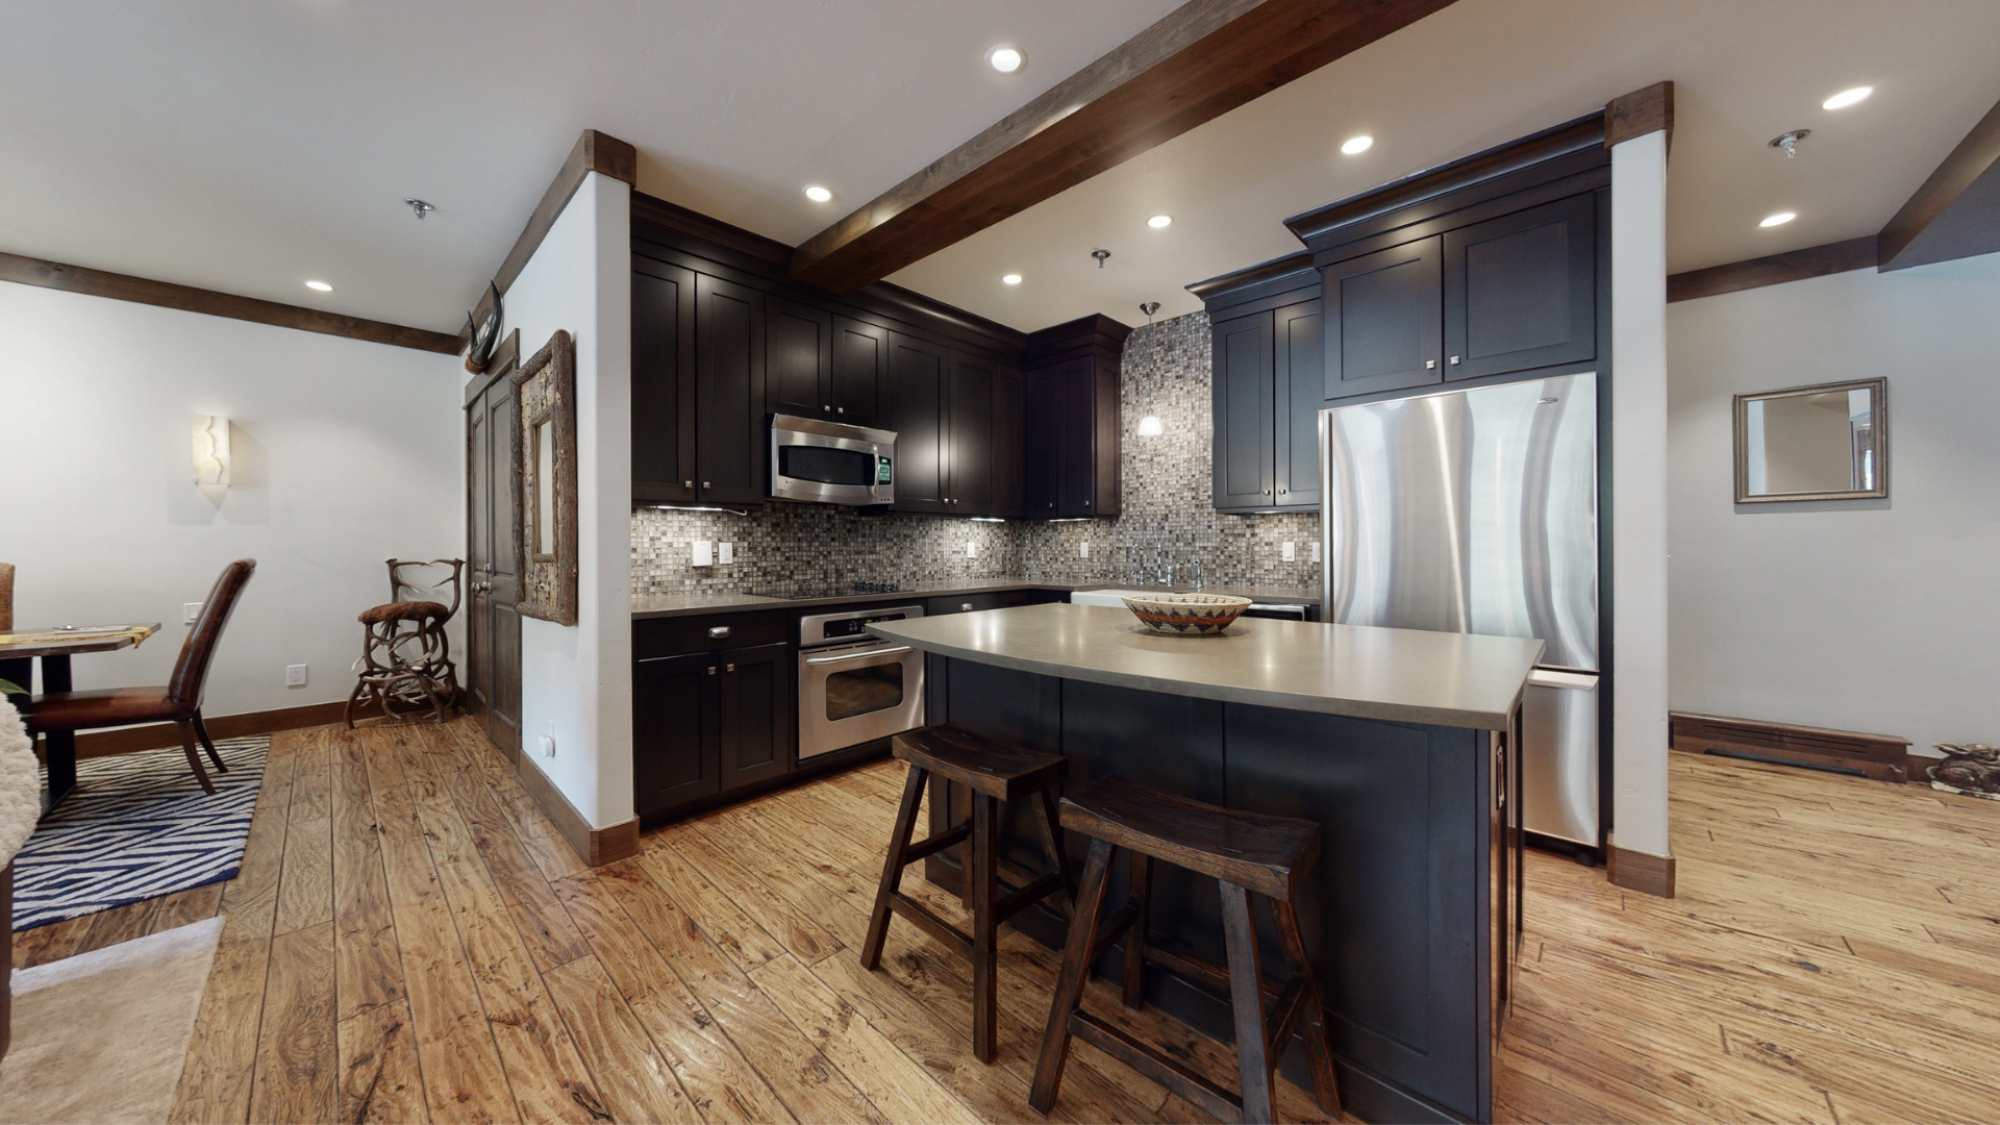 A modern kitchen featuring dark cabinetry, stainless steel appliances, an island with stools, and a dining area to the side.